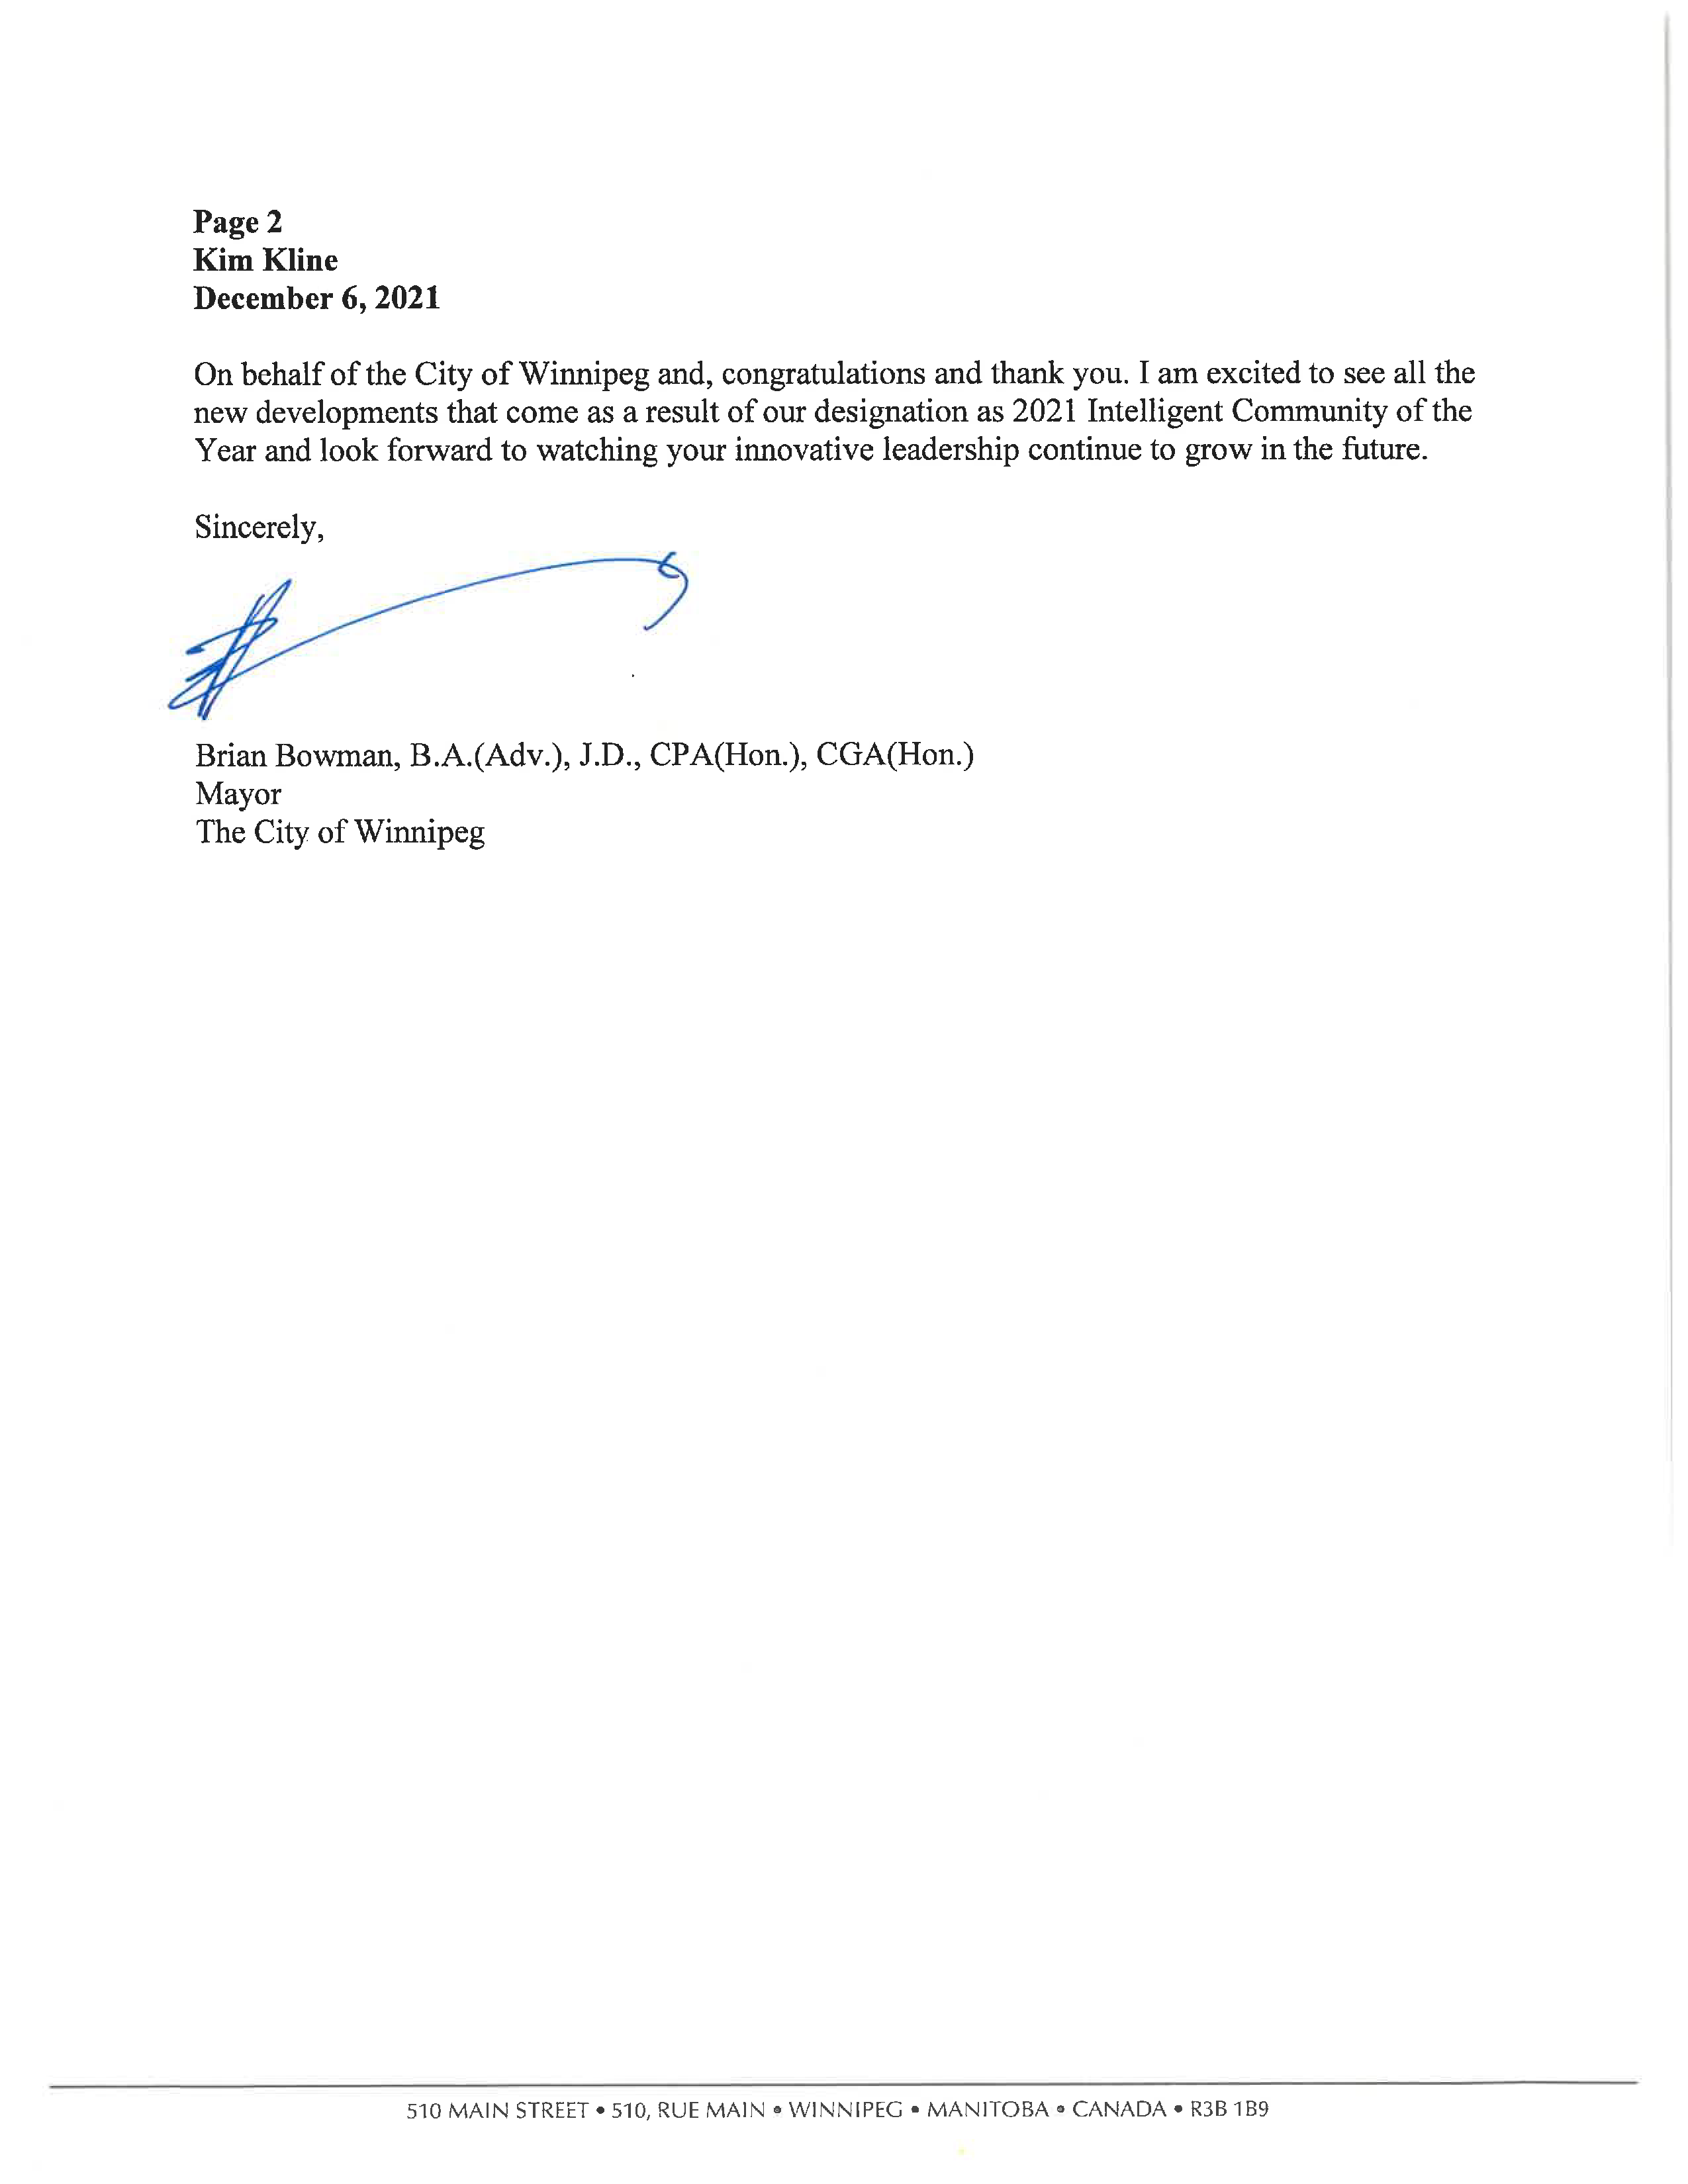 Appreciation Letter from Mayor Bowman_Page_2.png (115 KB)